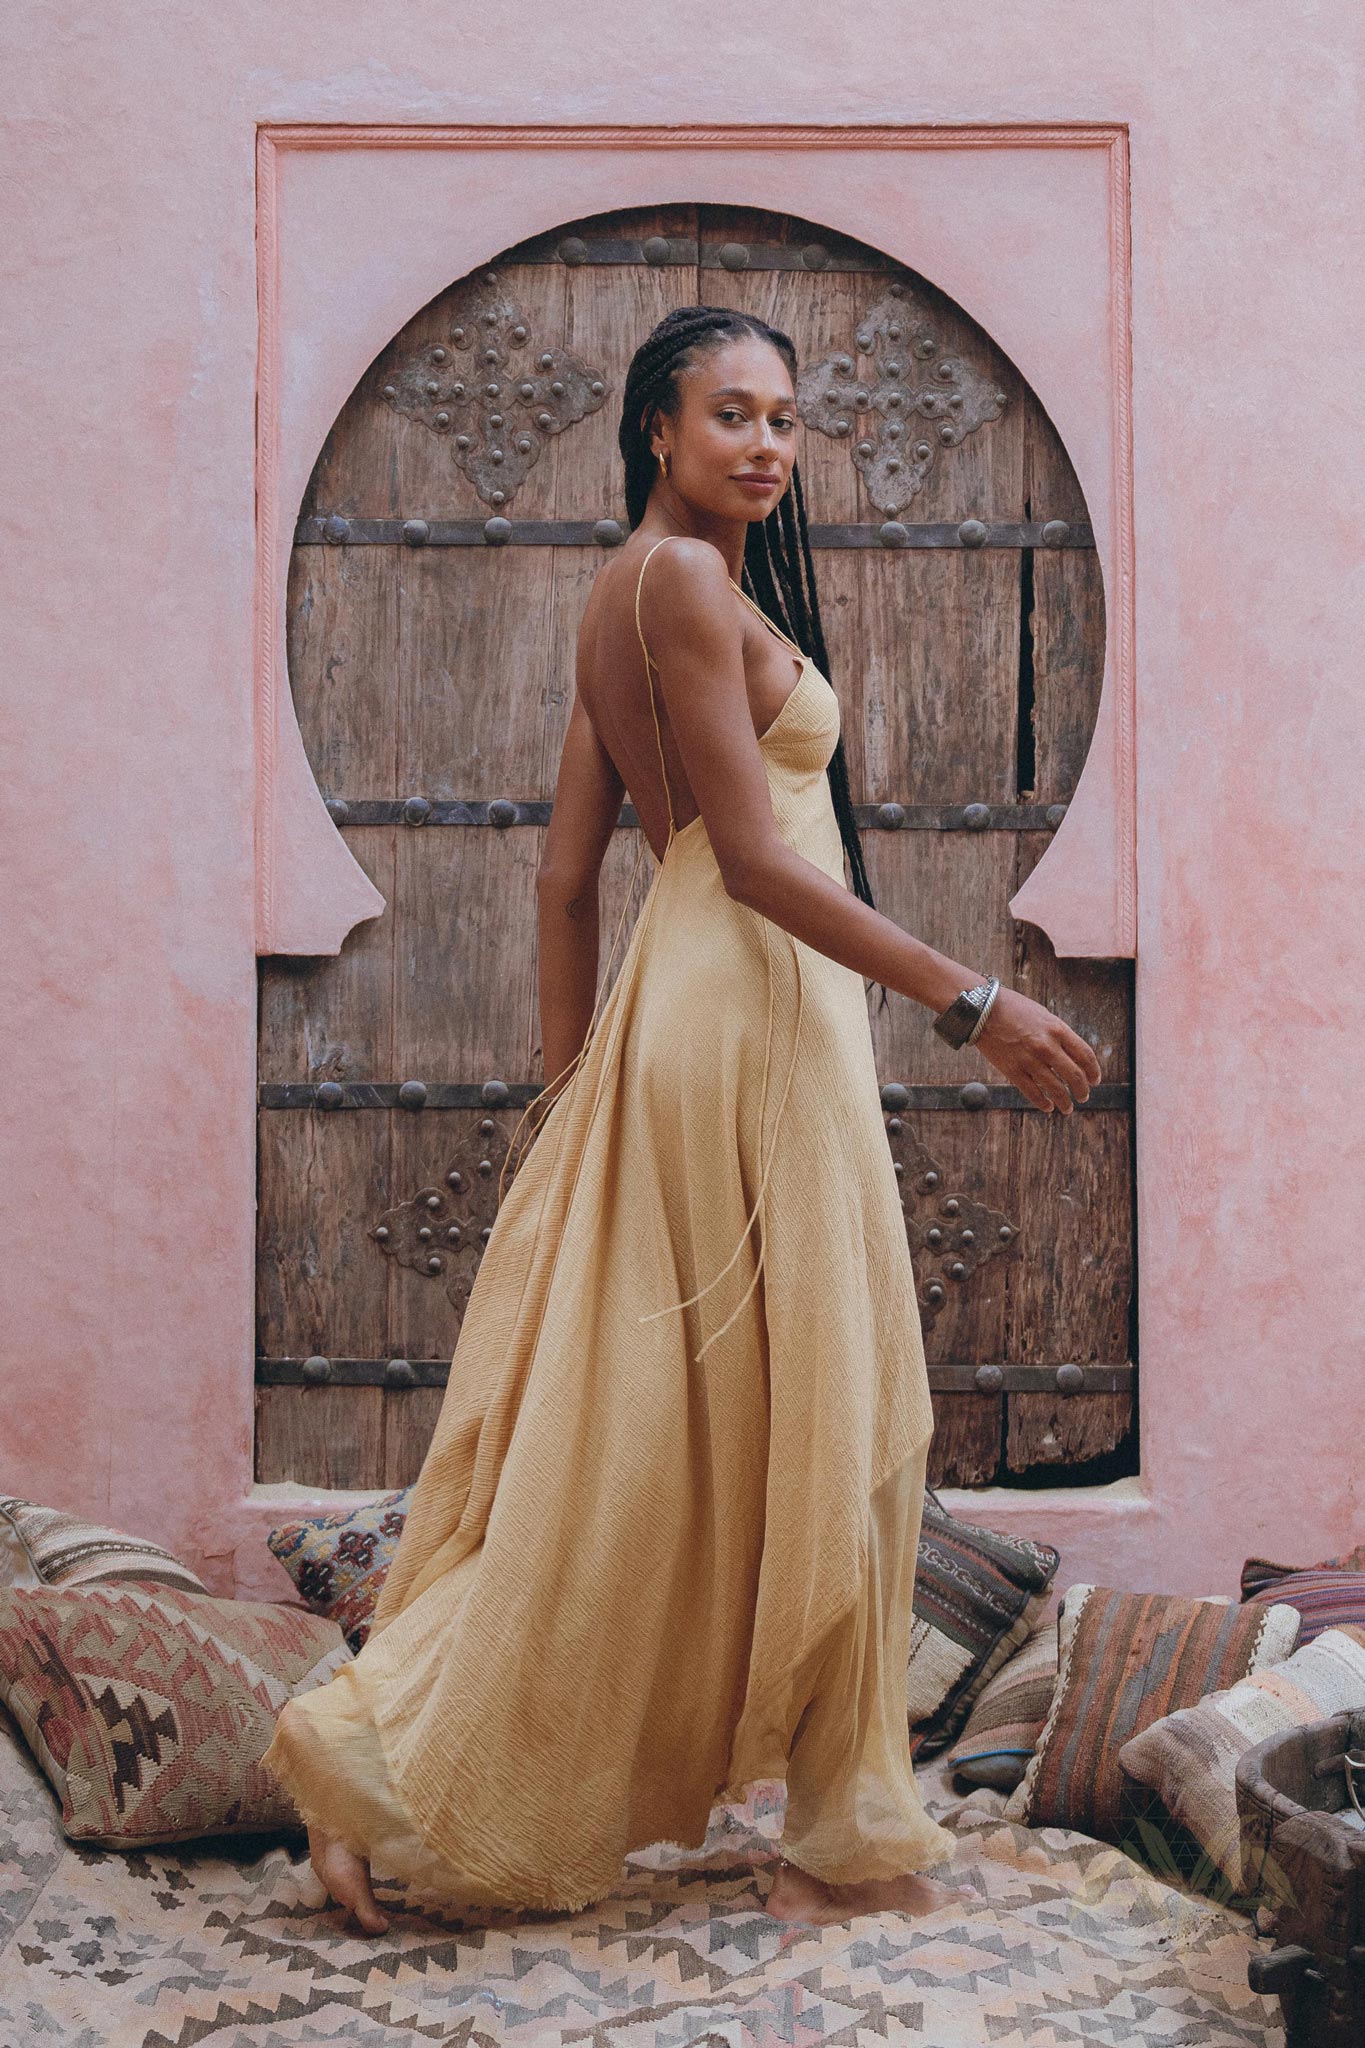 Add some style to your wardrobe with the powder yellow dress from Aya Sacred Wear.